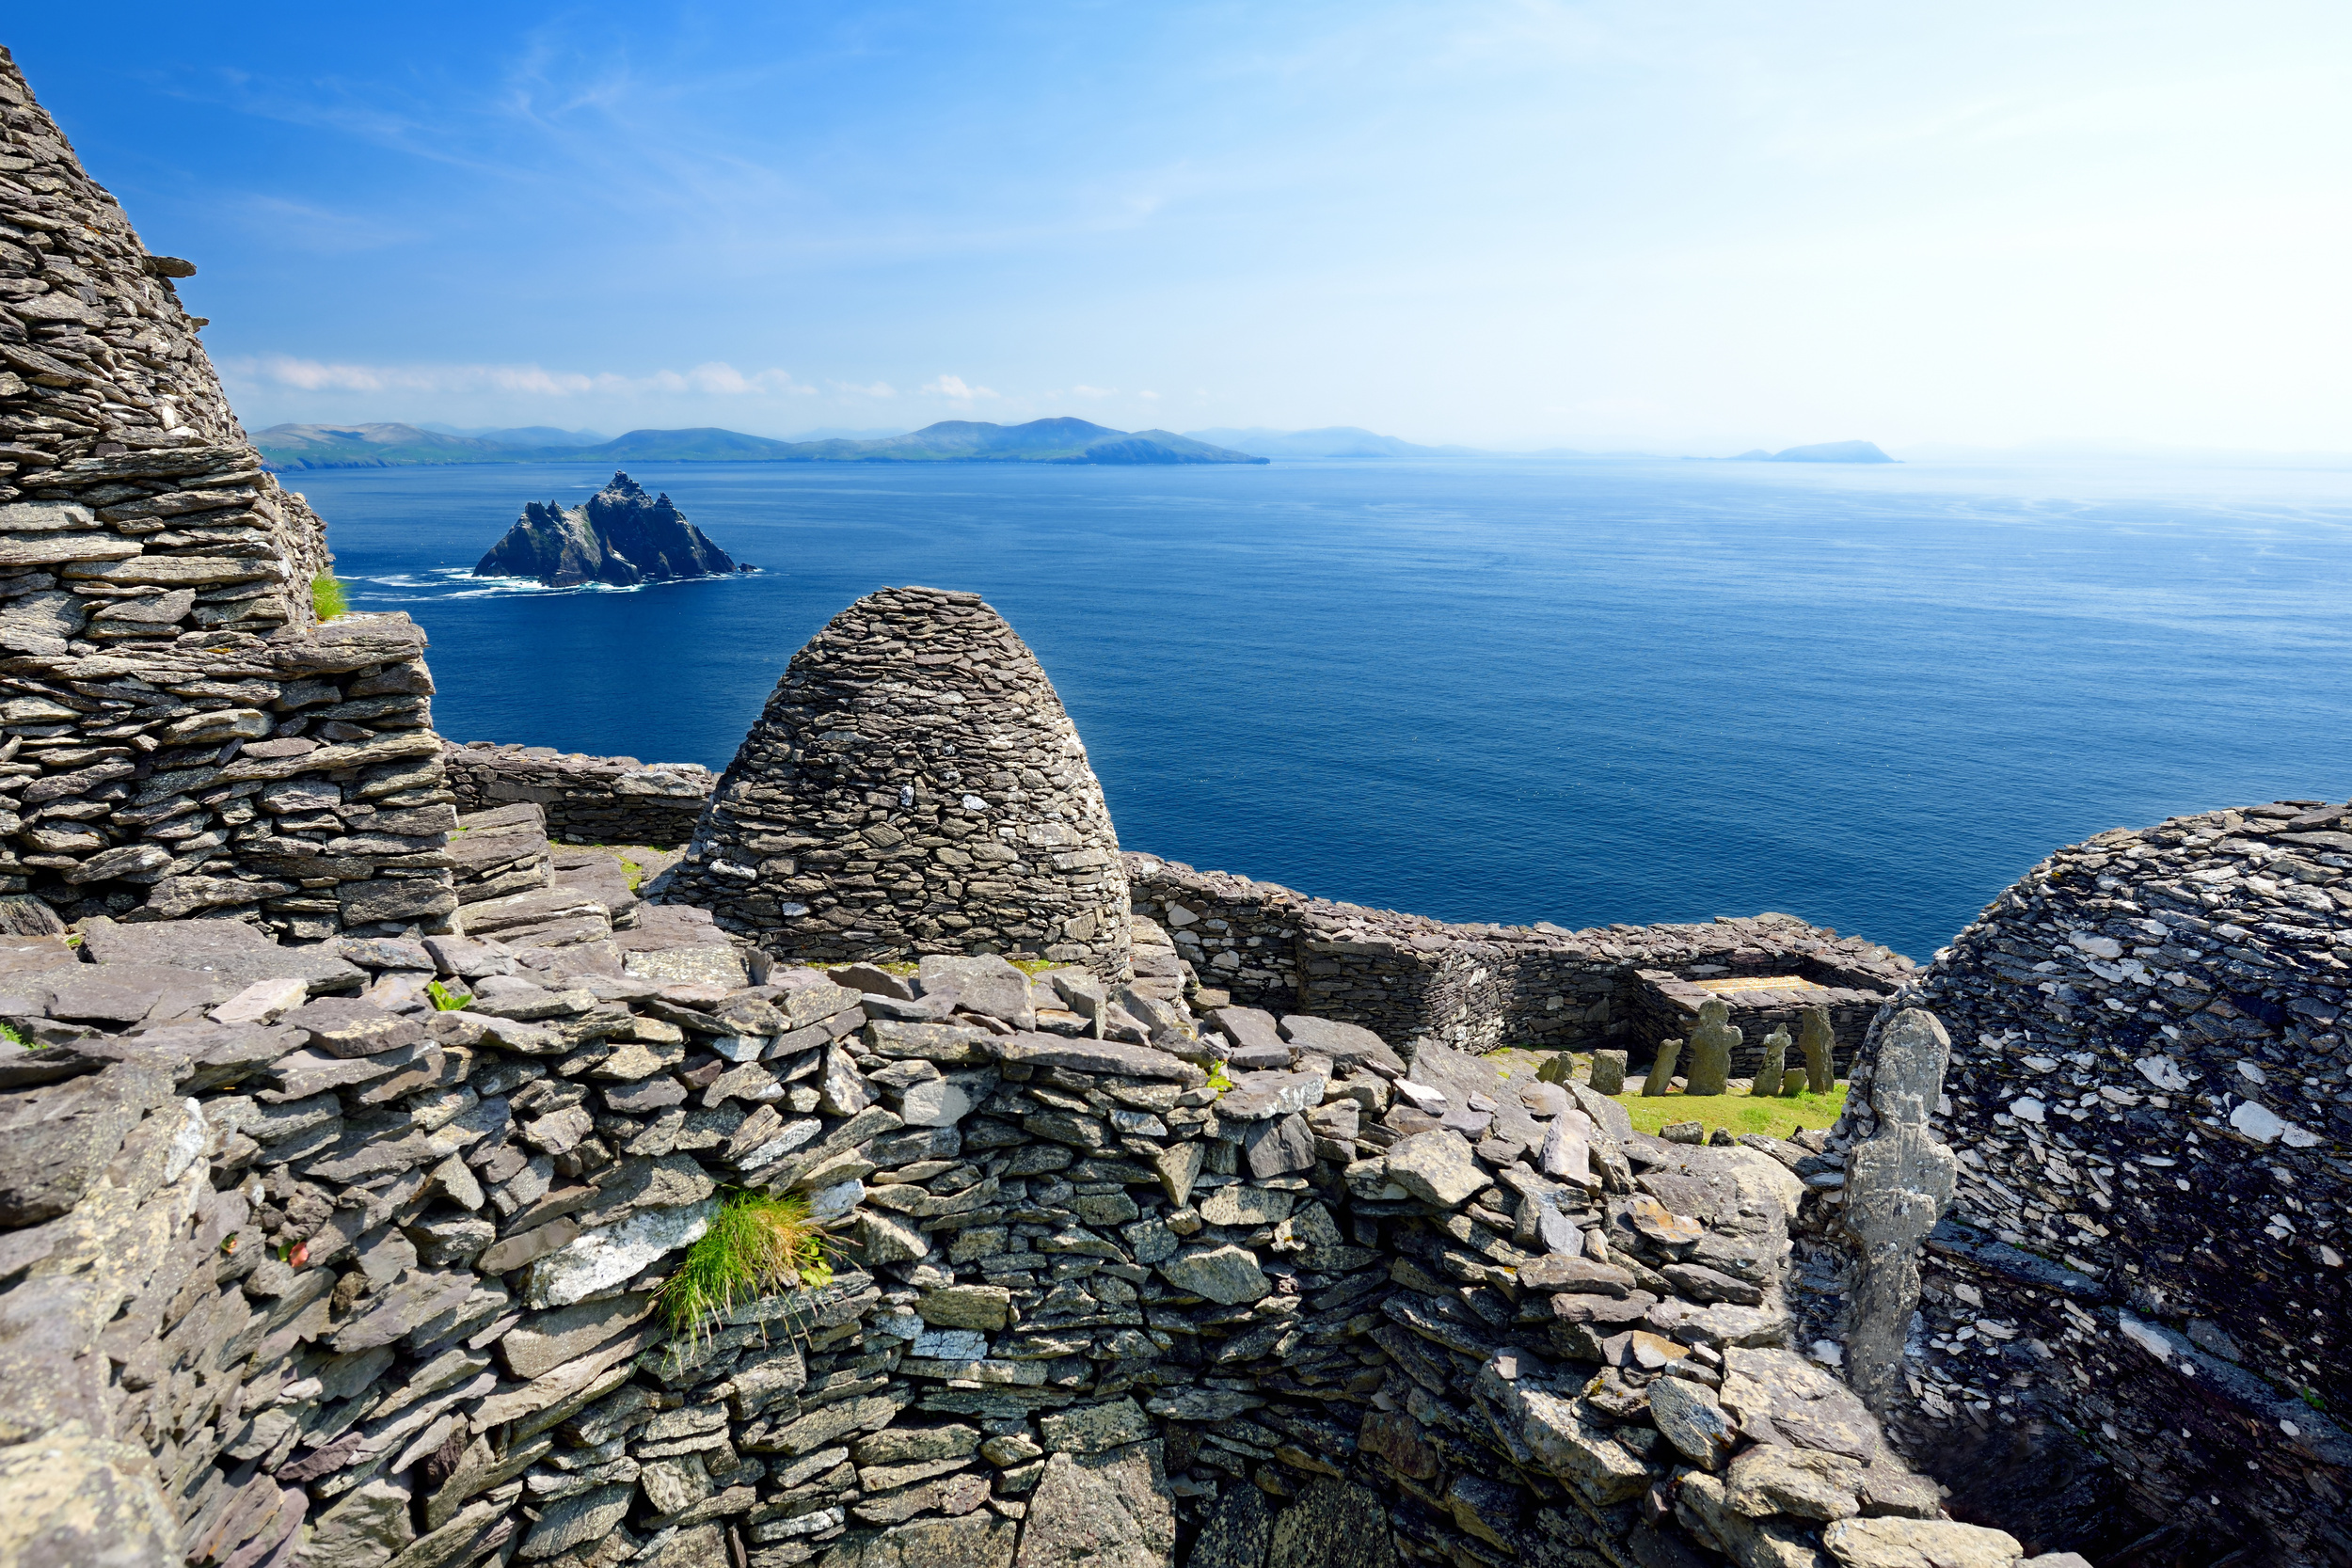 <p>The Skellig Islands off the coast of Ireland will offer a different experience than other remote islands, but it’ll still be incredible. The islands are known for their abundance of unique birds and aquatic animals, so there will always be something natural to gaze at while on them. </p><p><a href='https://www.msn.com/en-us/community/channel/vid-cj9pqbr0vn9in2b6ddcd8sfgpfq6x6utp44fssrv6mc2gtybw0us'>Follow us on MSN to see more of our exclusive lifestyle content.</a></p>